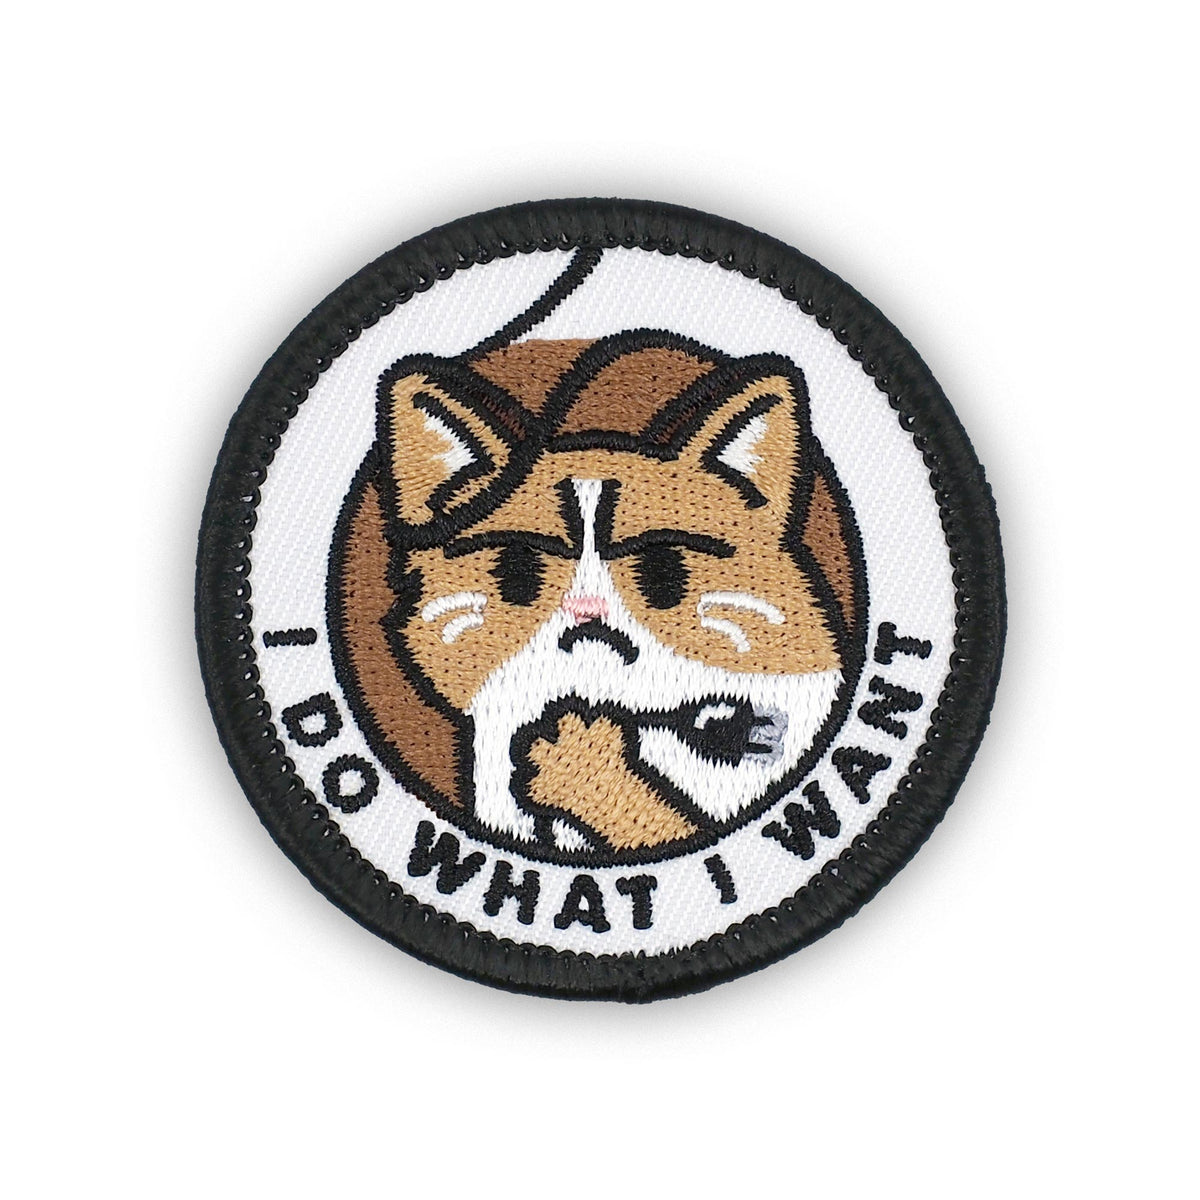 I Do What I Want Cat individual adulting merit badge patch for adults